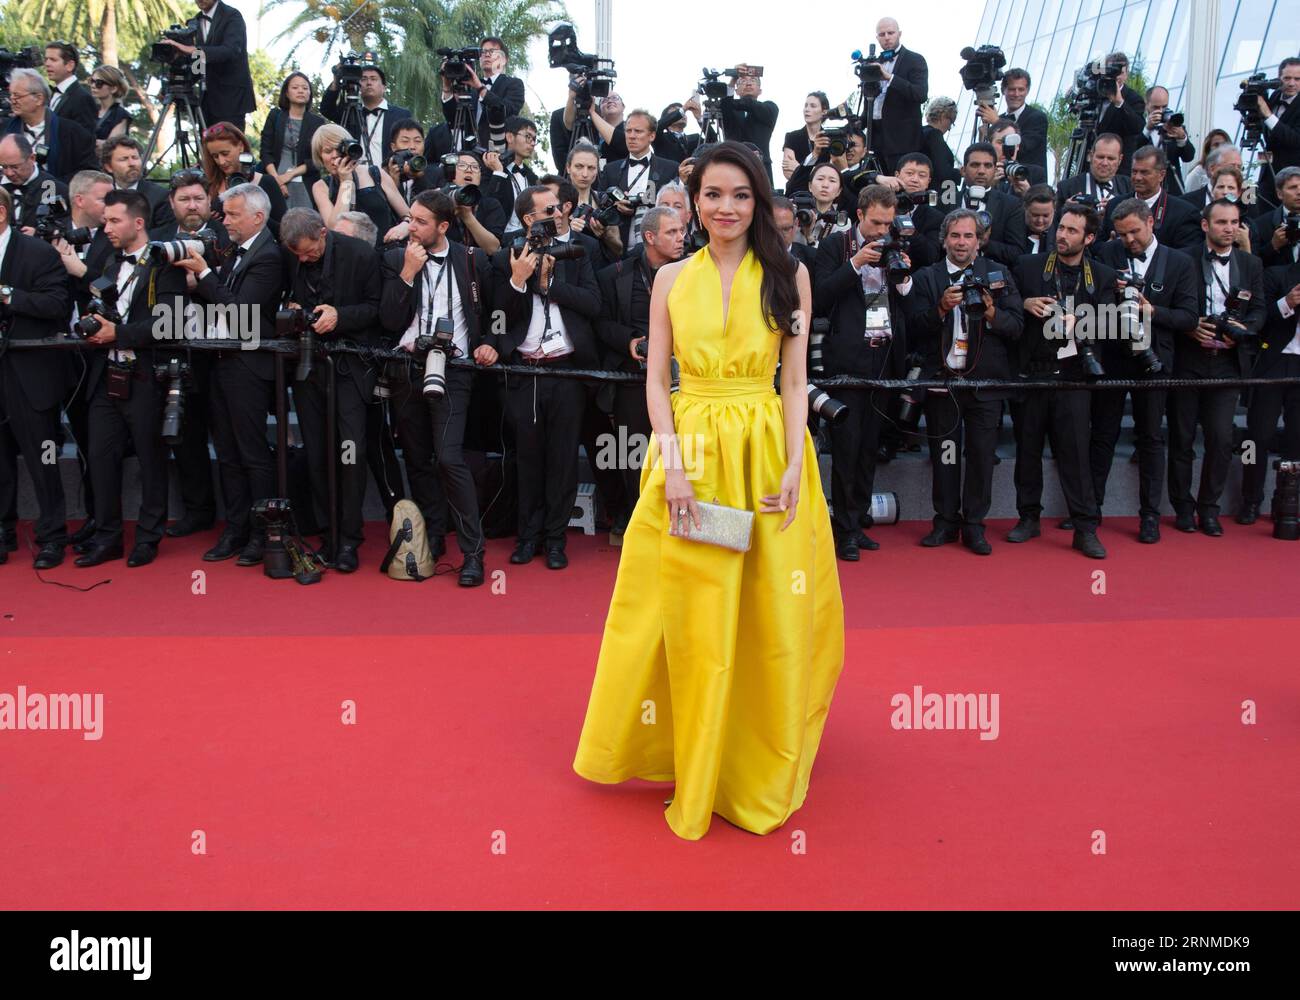 (170524) -- CANNES, May 24, 2017 -- Actress Shu Qi attends the 70th Anniversary ceremony of the Cannes Film Festival in Cannes, France, May 23, 2017. ) (jmmn) FRANCE-CANNES-FILM FESTIVAL-70TH ANNIVERSARY-RED CARPET XuxJinquan PUBLICATIONxNOTxINxCHN   Cannes May 24 2017 actress Shu Qi Attends The 70th Anniversary Ceremony of The Cannes Film Festival in Cannes France May 23 2017 jmmn France Cannes Film Festival 70th Anniversary Red Carpet XuxJinquan PUBLICATIONxNOTxINxCHN Stock Photo